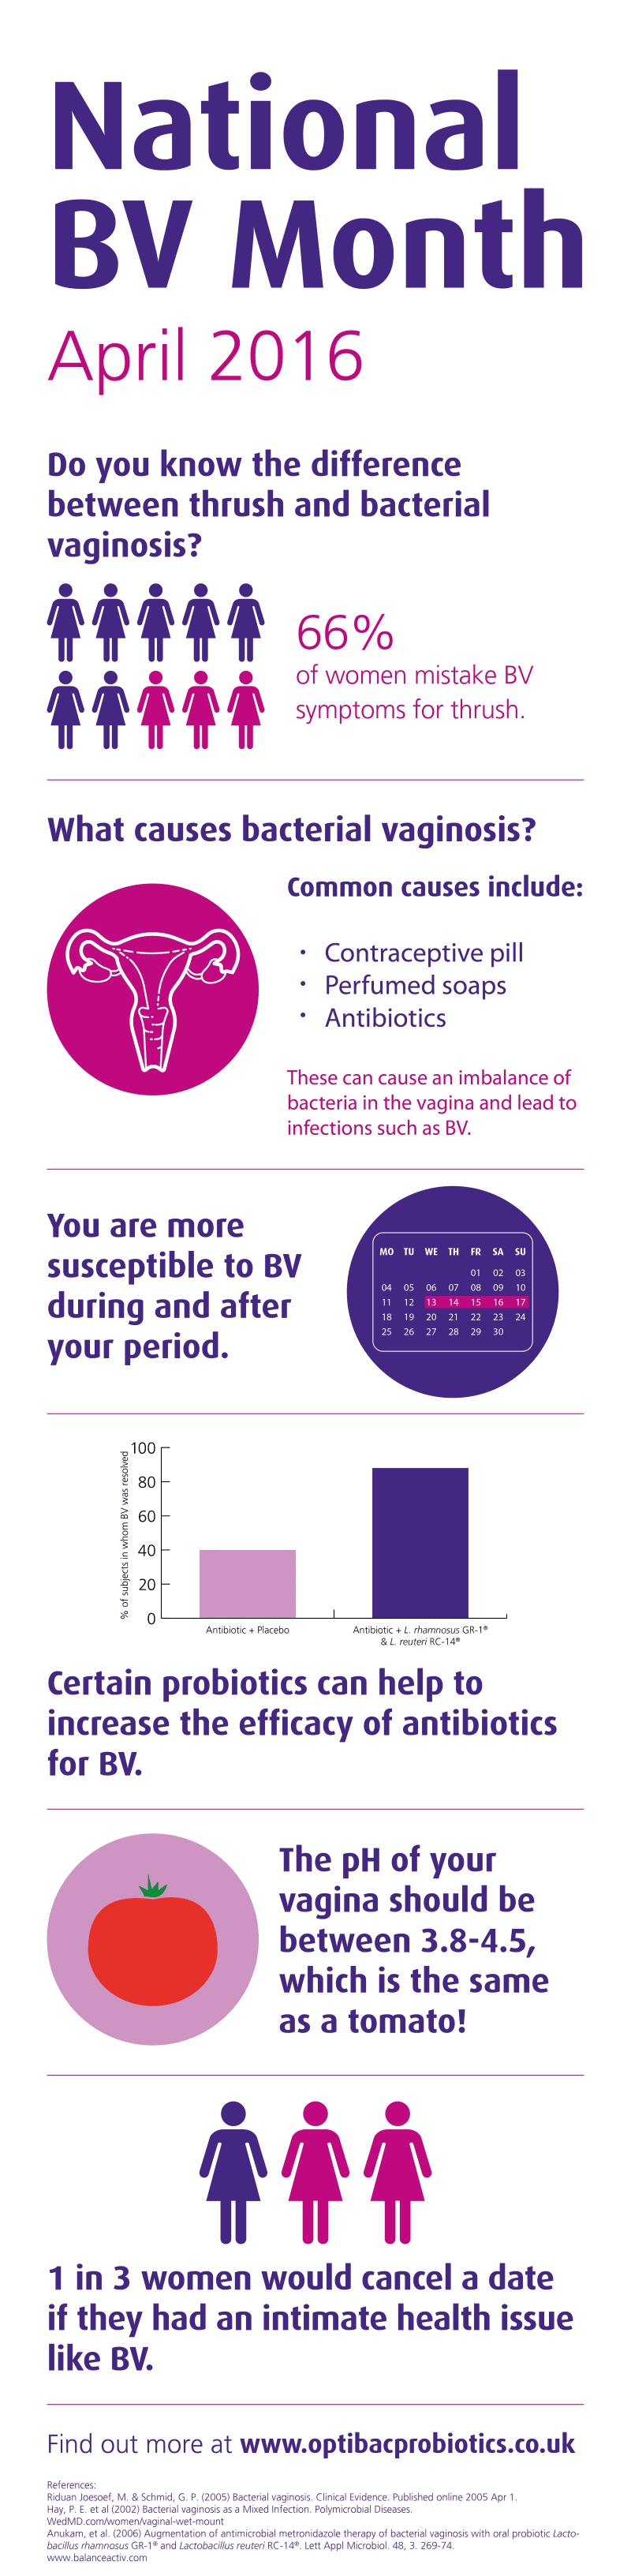 National BV month infographic | Probiotics Learning Lab